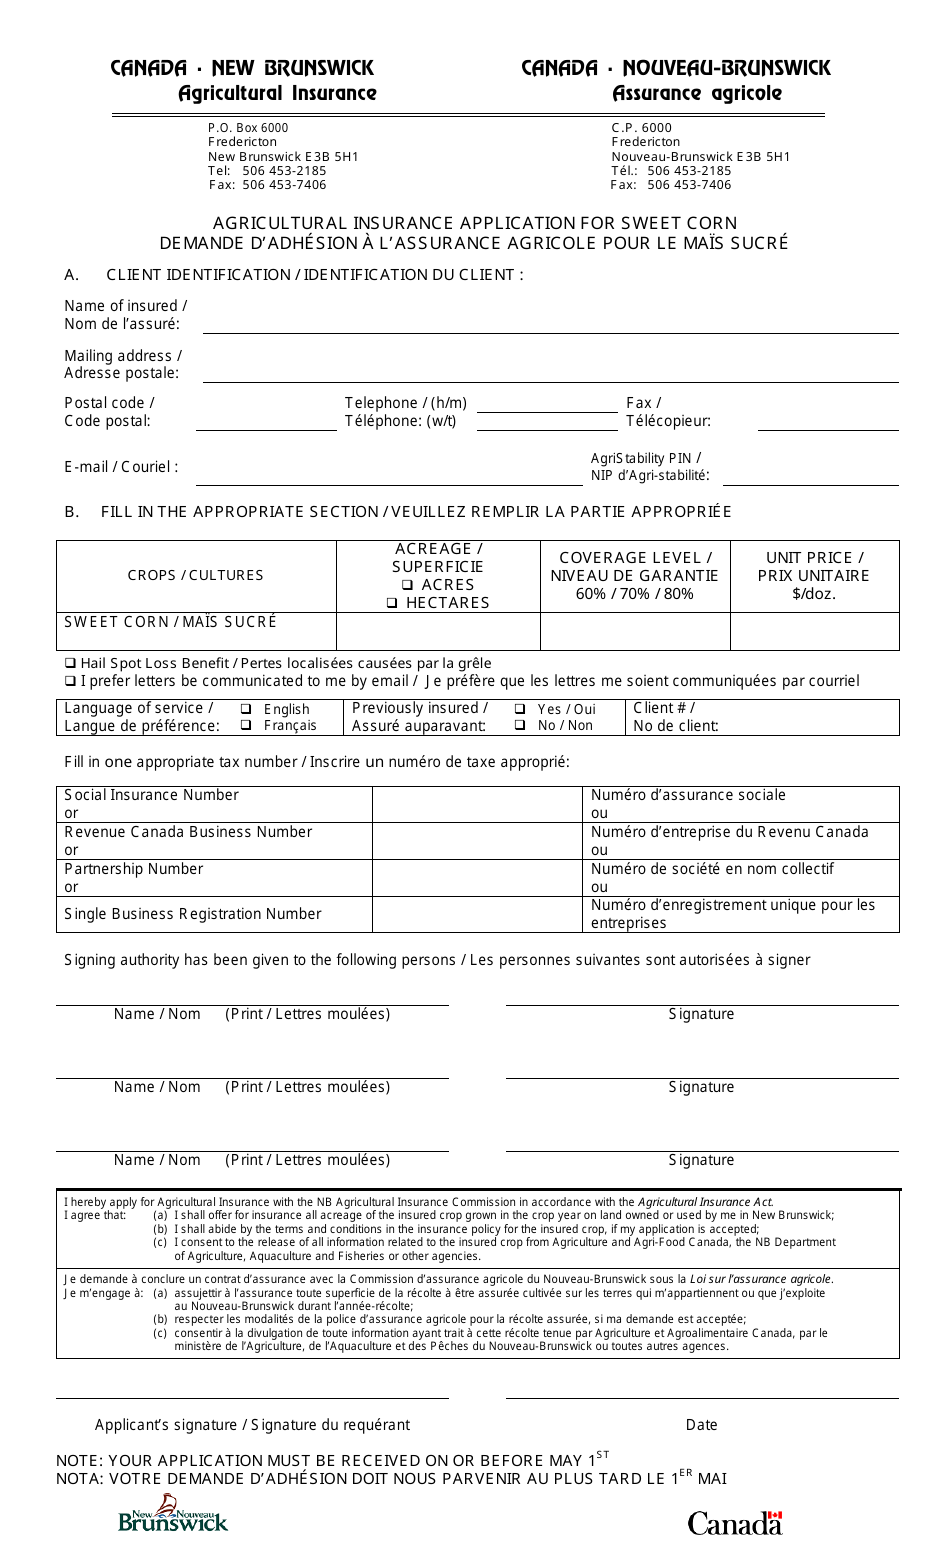 Agricultural Insurance Application - Sweet Corn - New Brunswick, Canada (English / French), Page 1